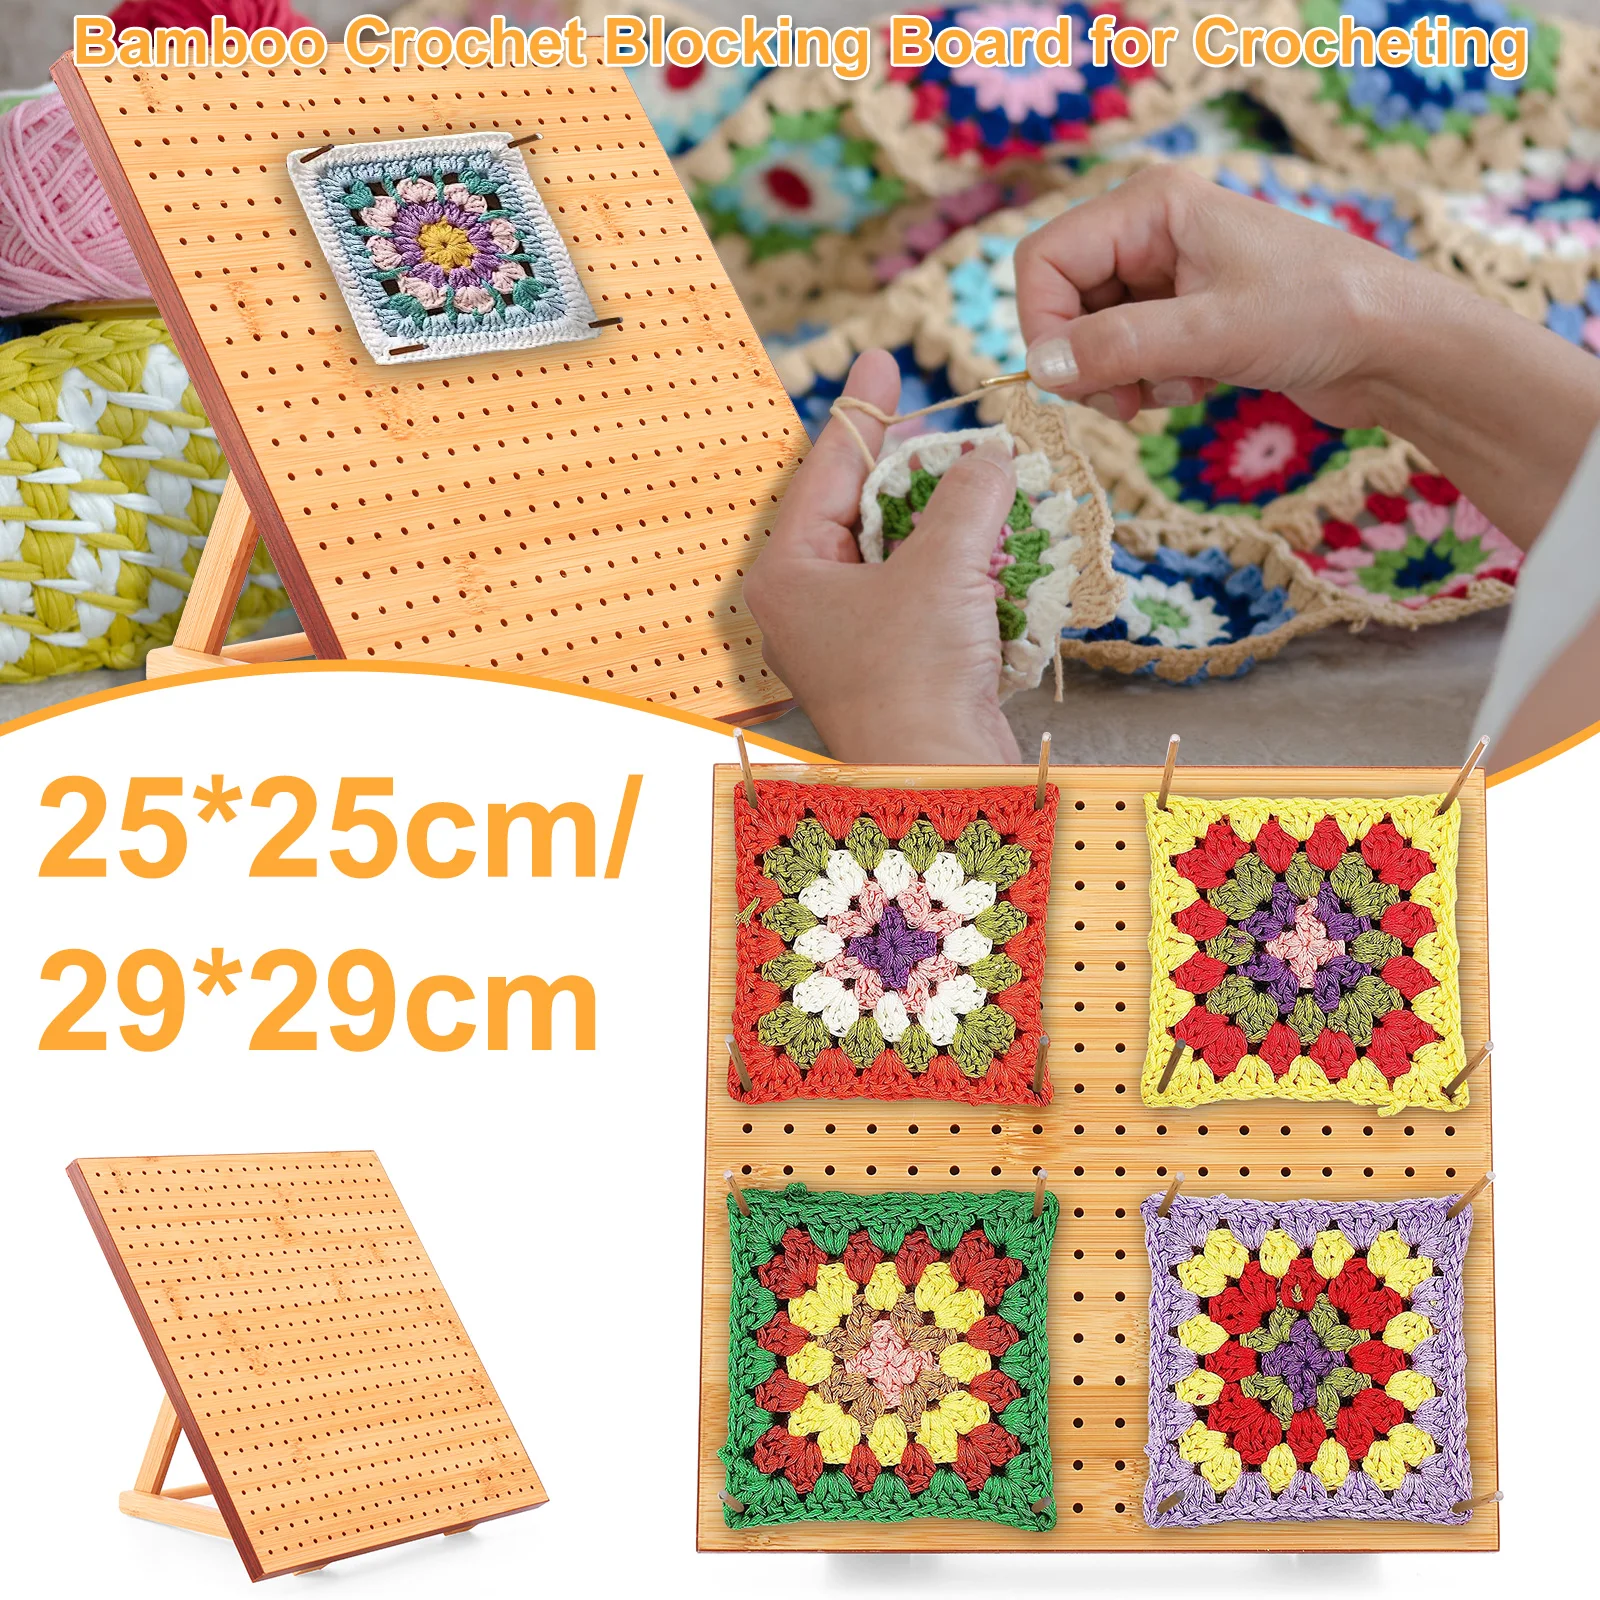 Wood Crochet Blocking Board Kit With Stainless Steel Rod Pins For